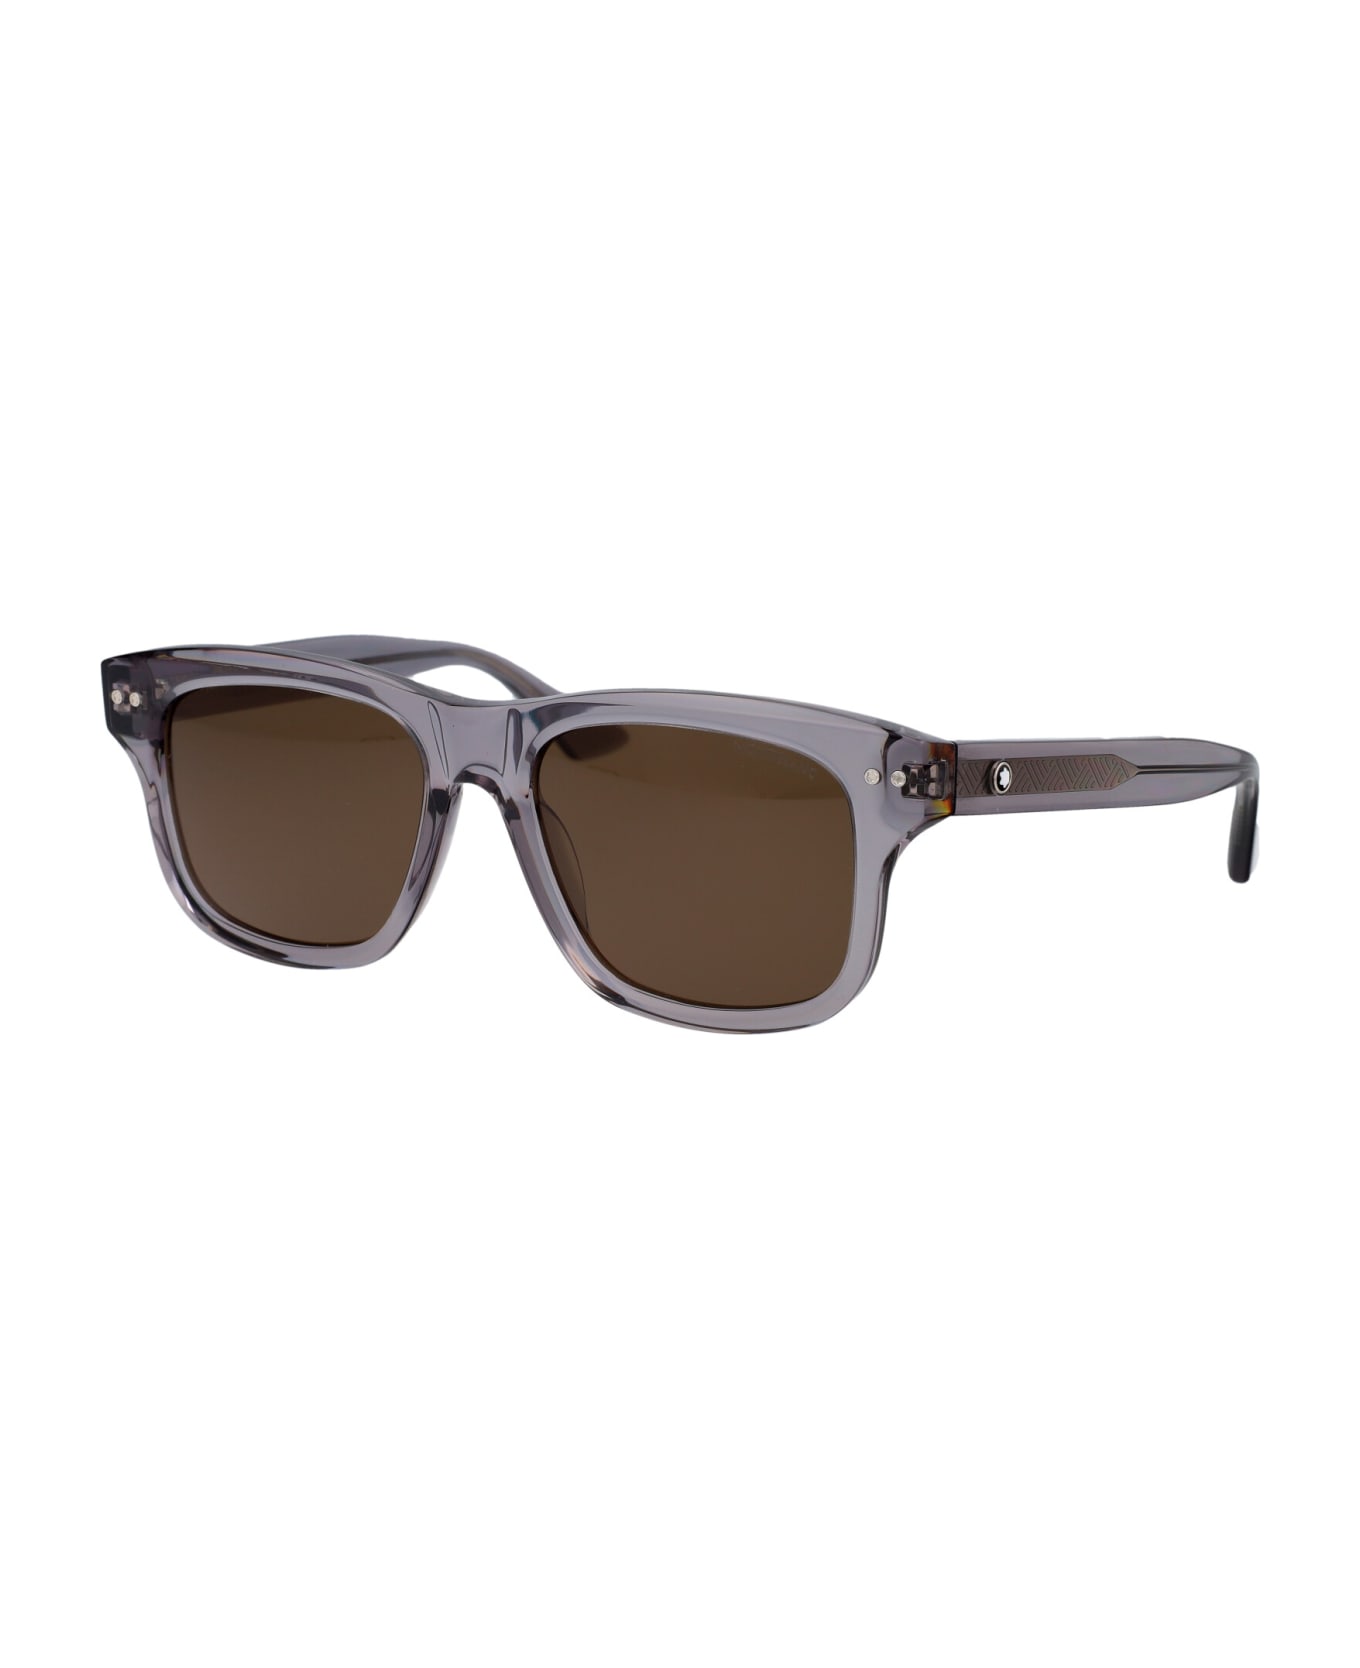 Montblanc Mb0319s Sunglasses - 004 GREY GREY BROWN